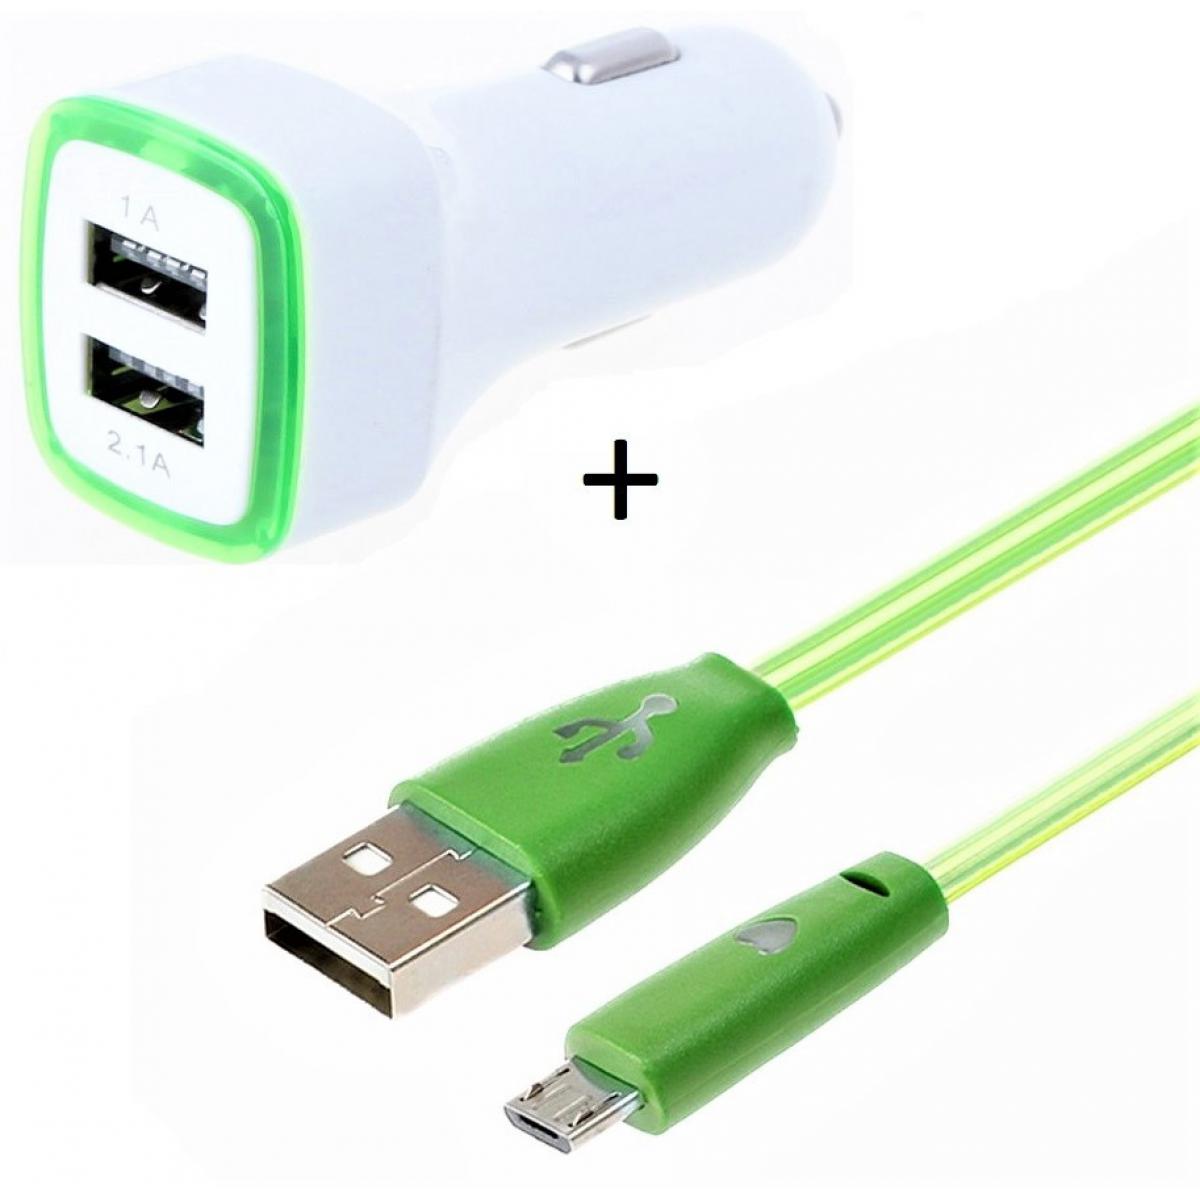 Shot - Pack Chargeur Voiture pour HUAWEI Y6s Smartphone Micro USB (Cable Smiley + Double Adaptateur LED Allume Cigare) (VERT) - Chargeur Voiture 12V